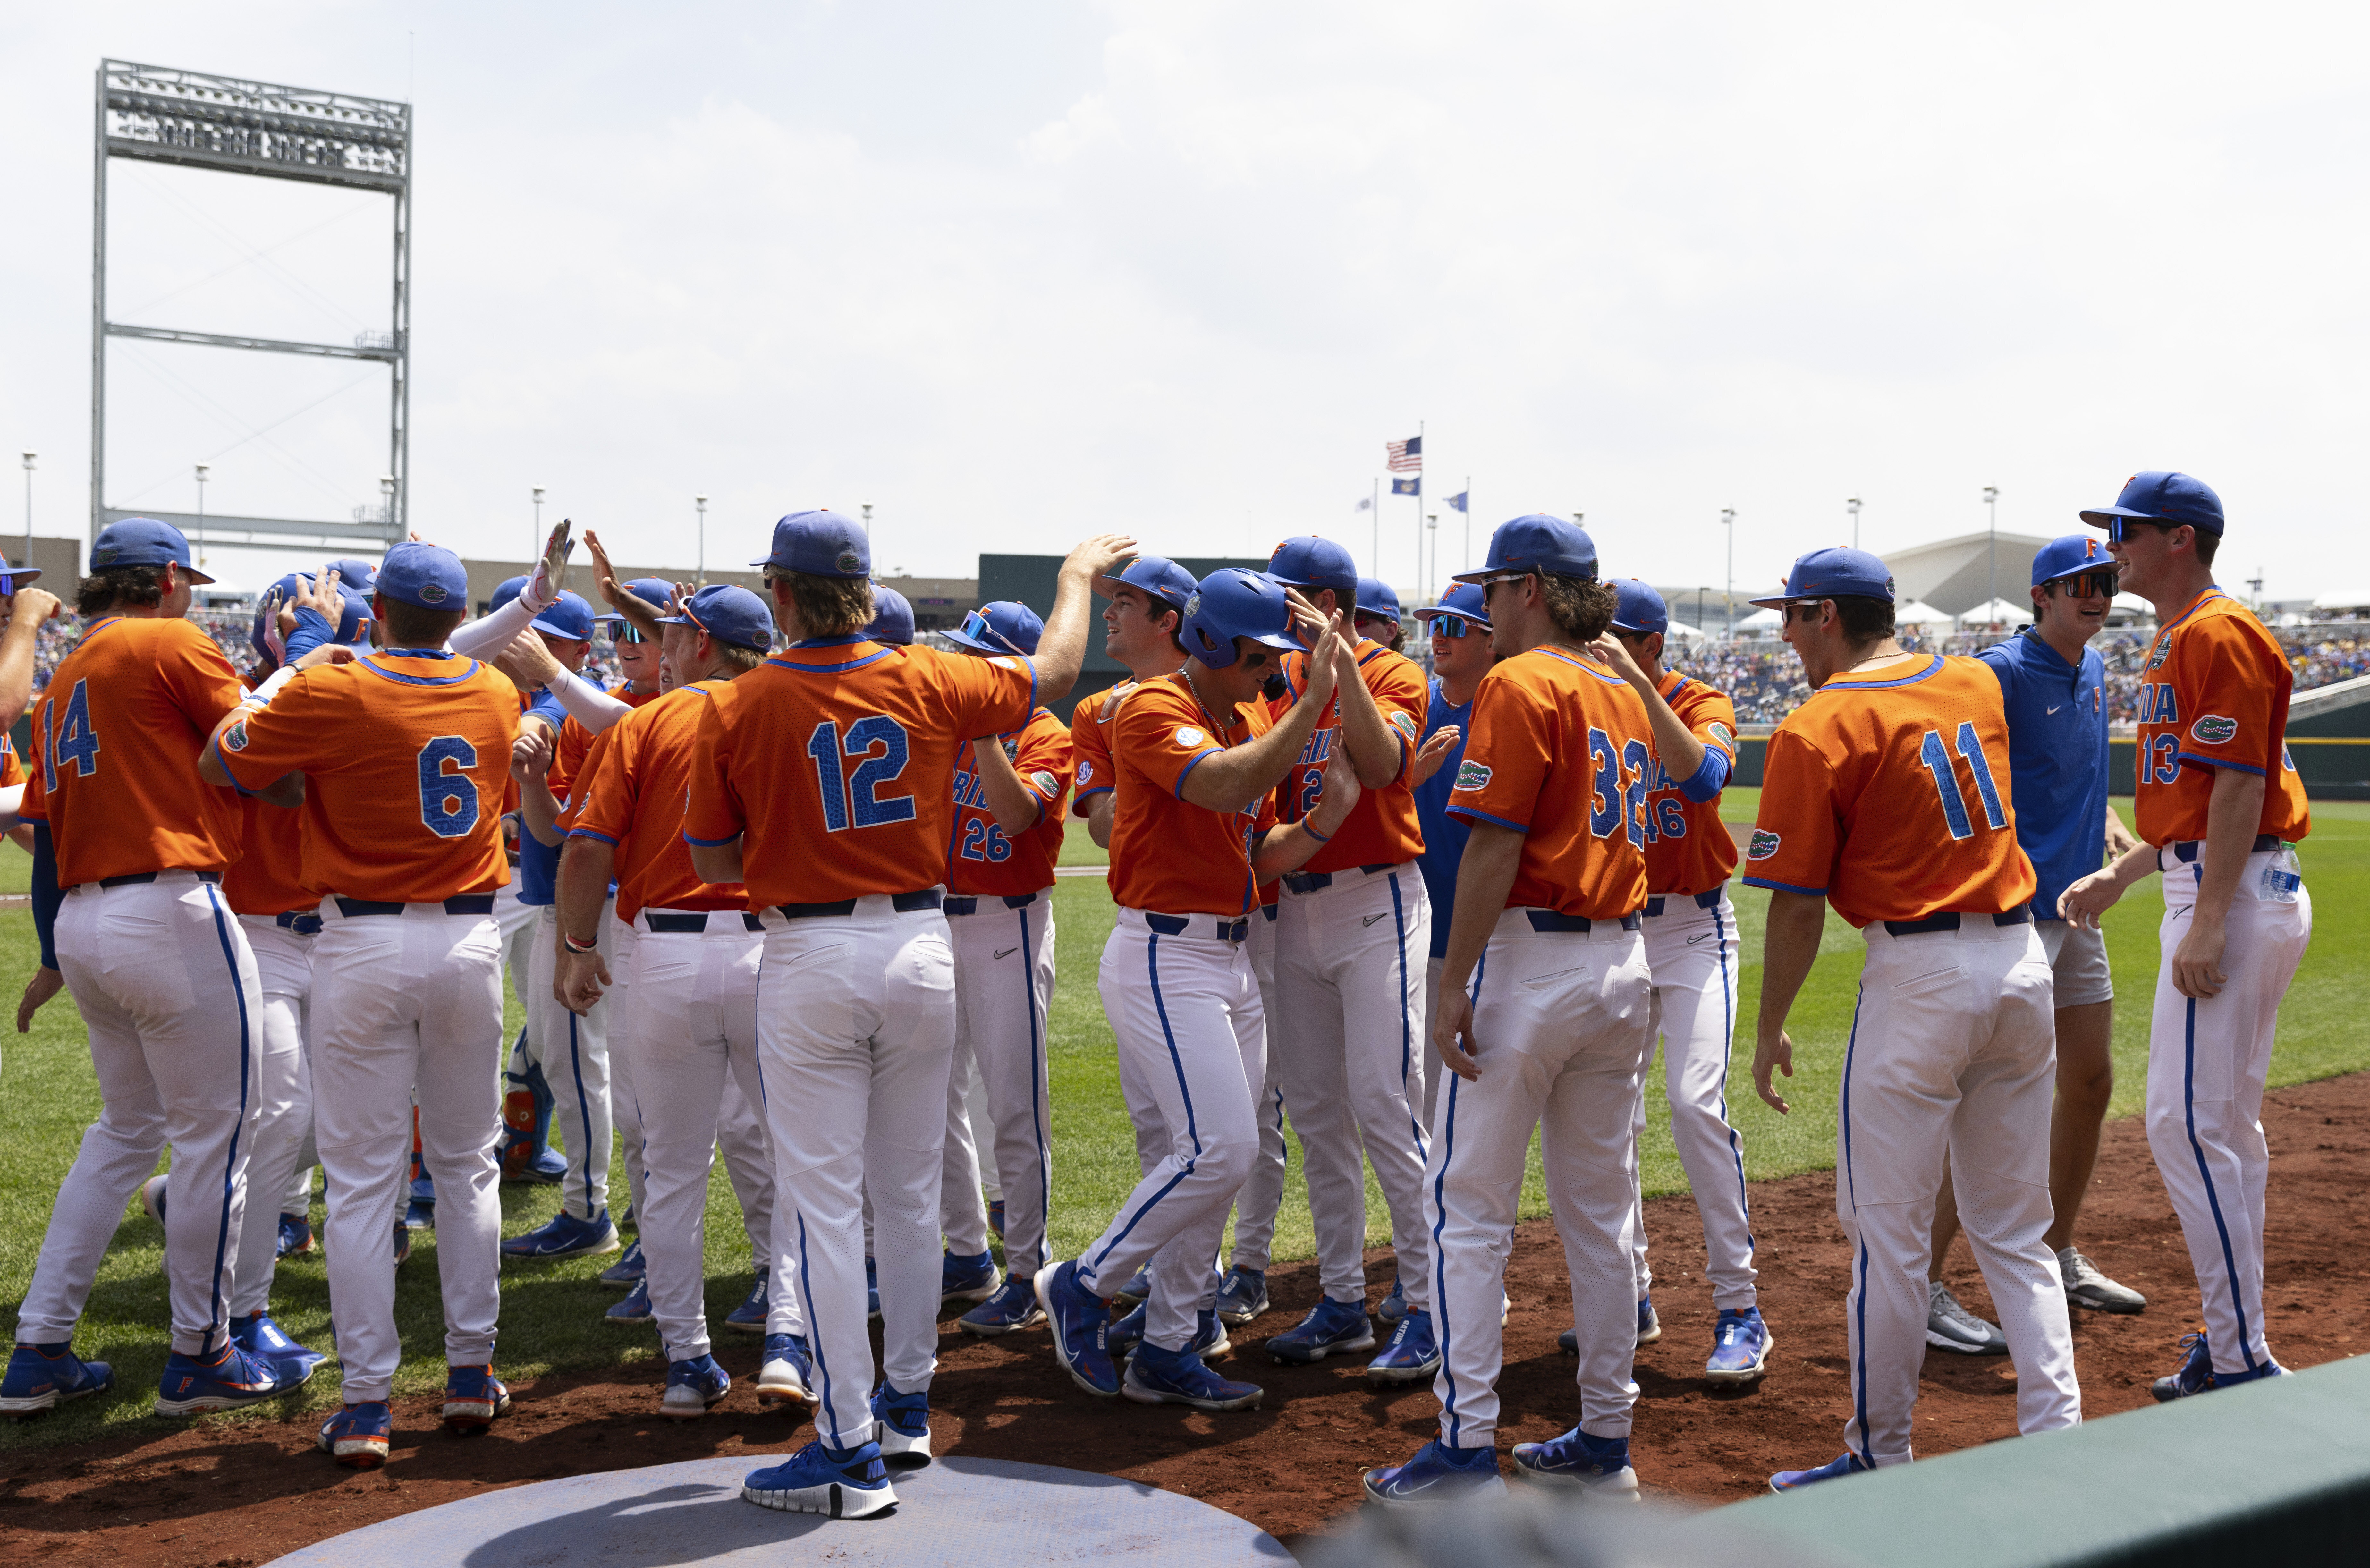 Gators advance to Men's College World Series finals after